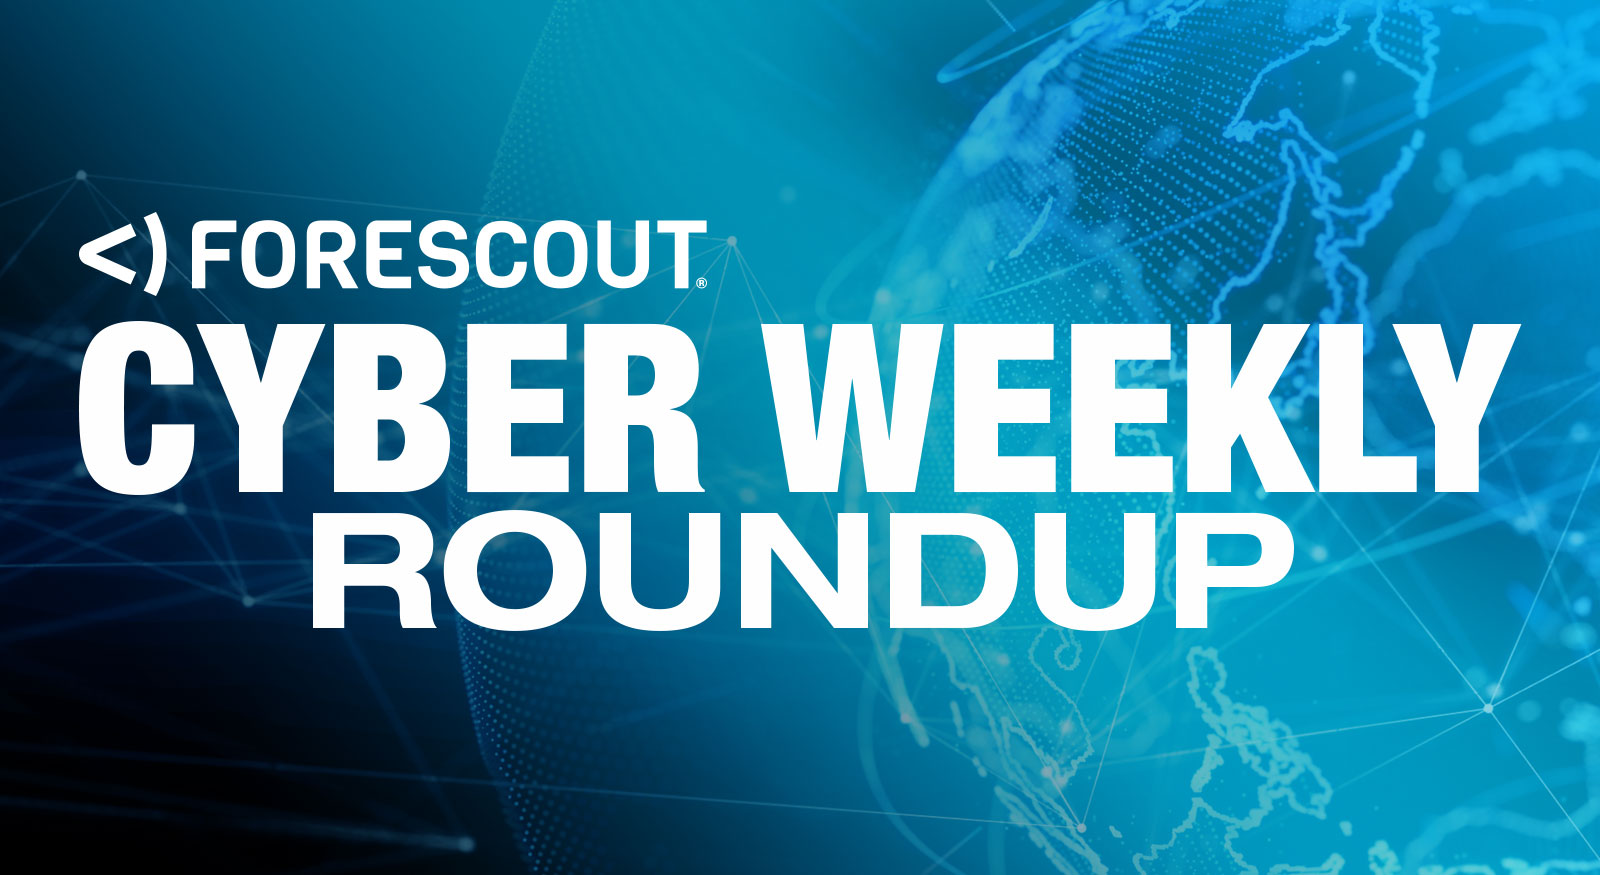 Forescout Cyber Weekly Roundup June 14, 2019 - Forescout